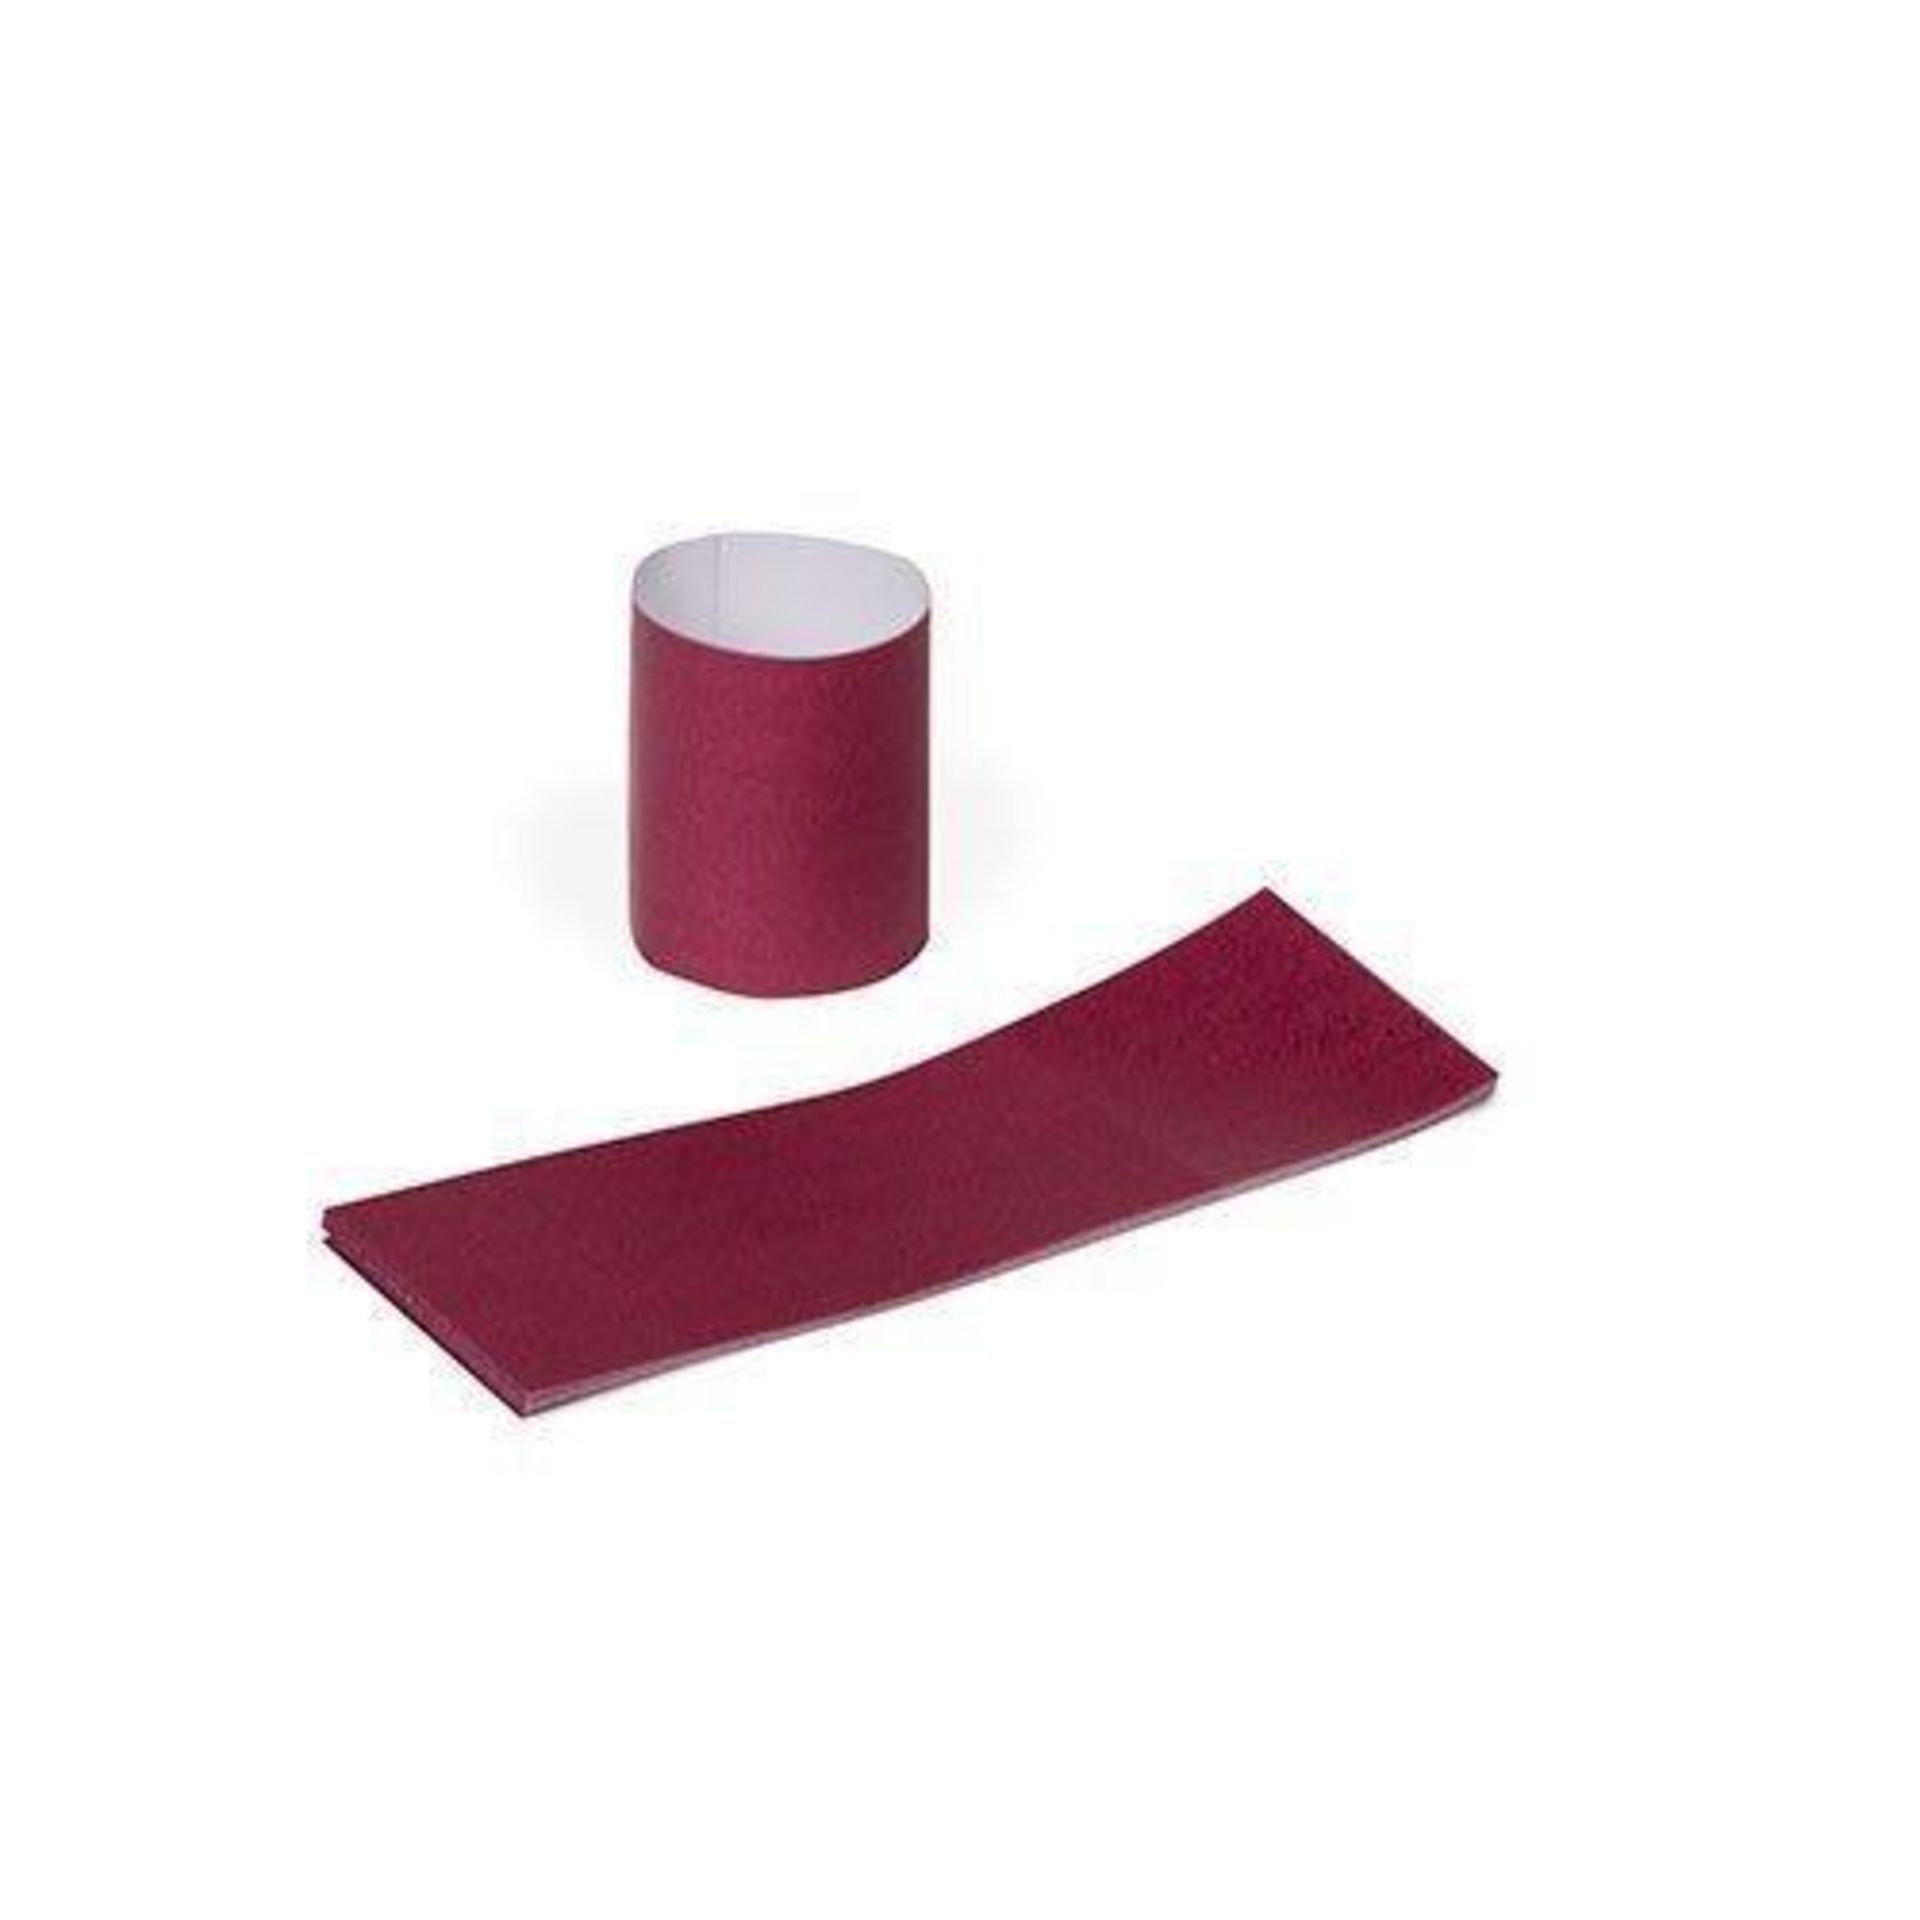 12,500 x Burgundy Royal Napkin Bands - Includes 5 x Boxes of 2,500 - Product Code RNB20MN - Brand Ne - Image 4 of 4